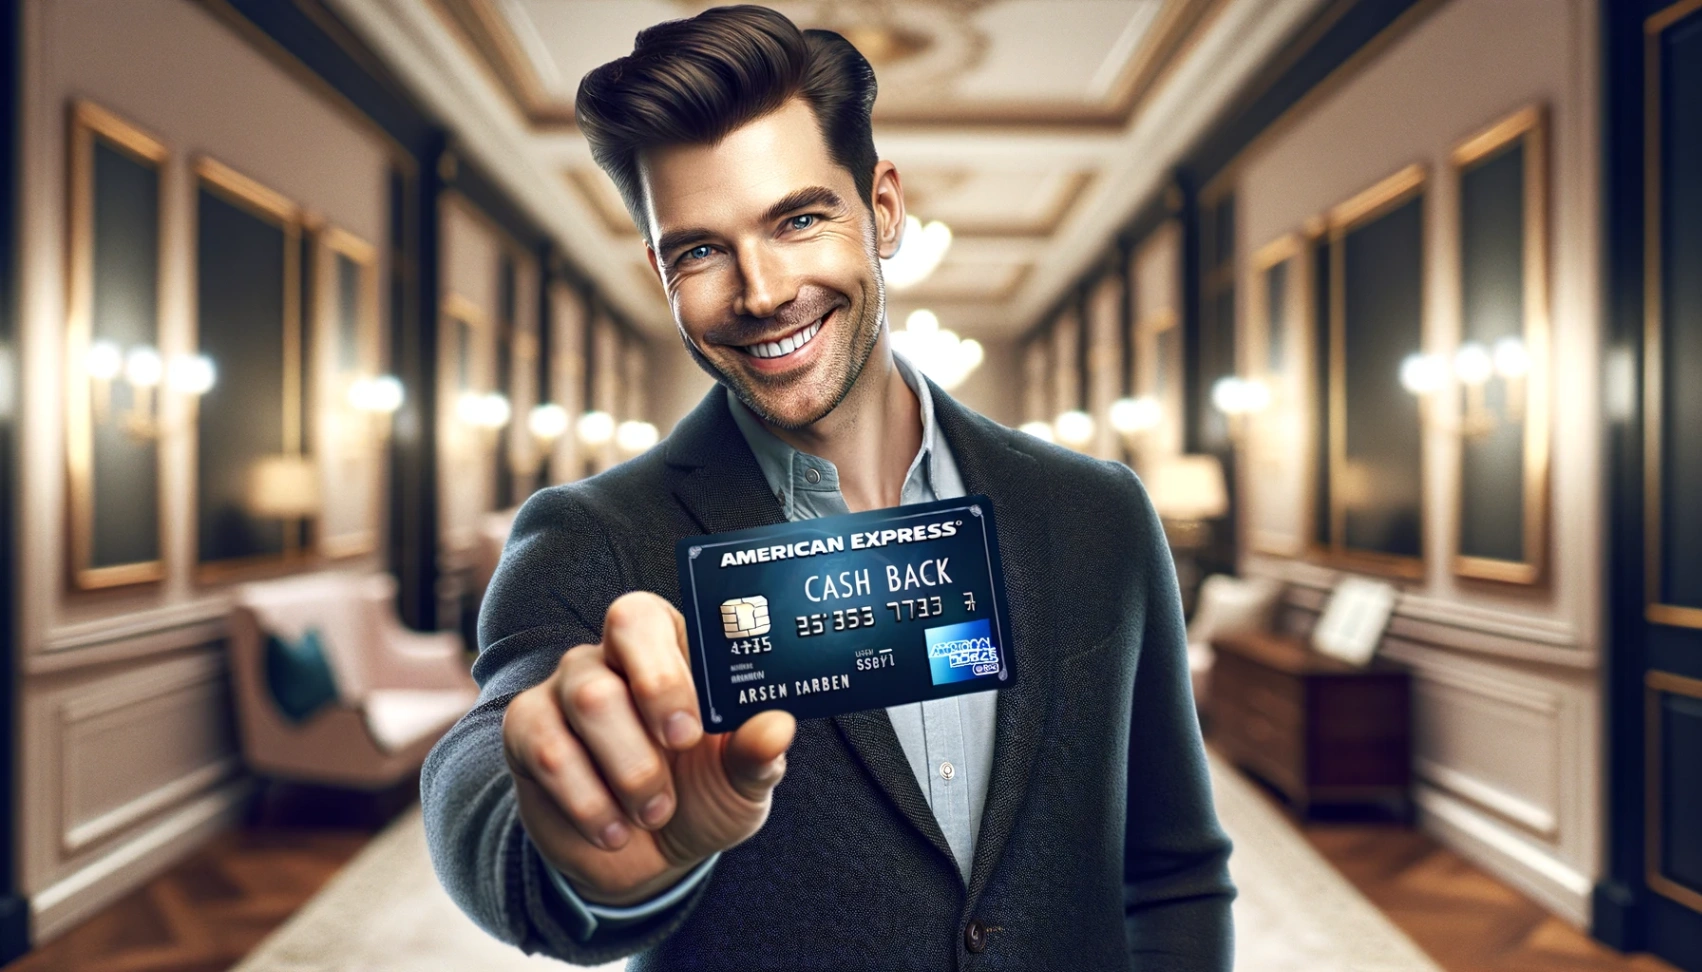 Amex® Cashback Credit Card: Learn How to Apply